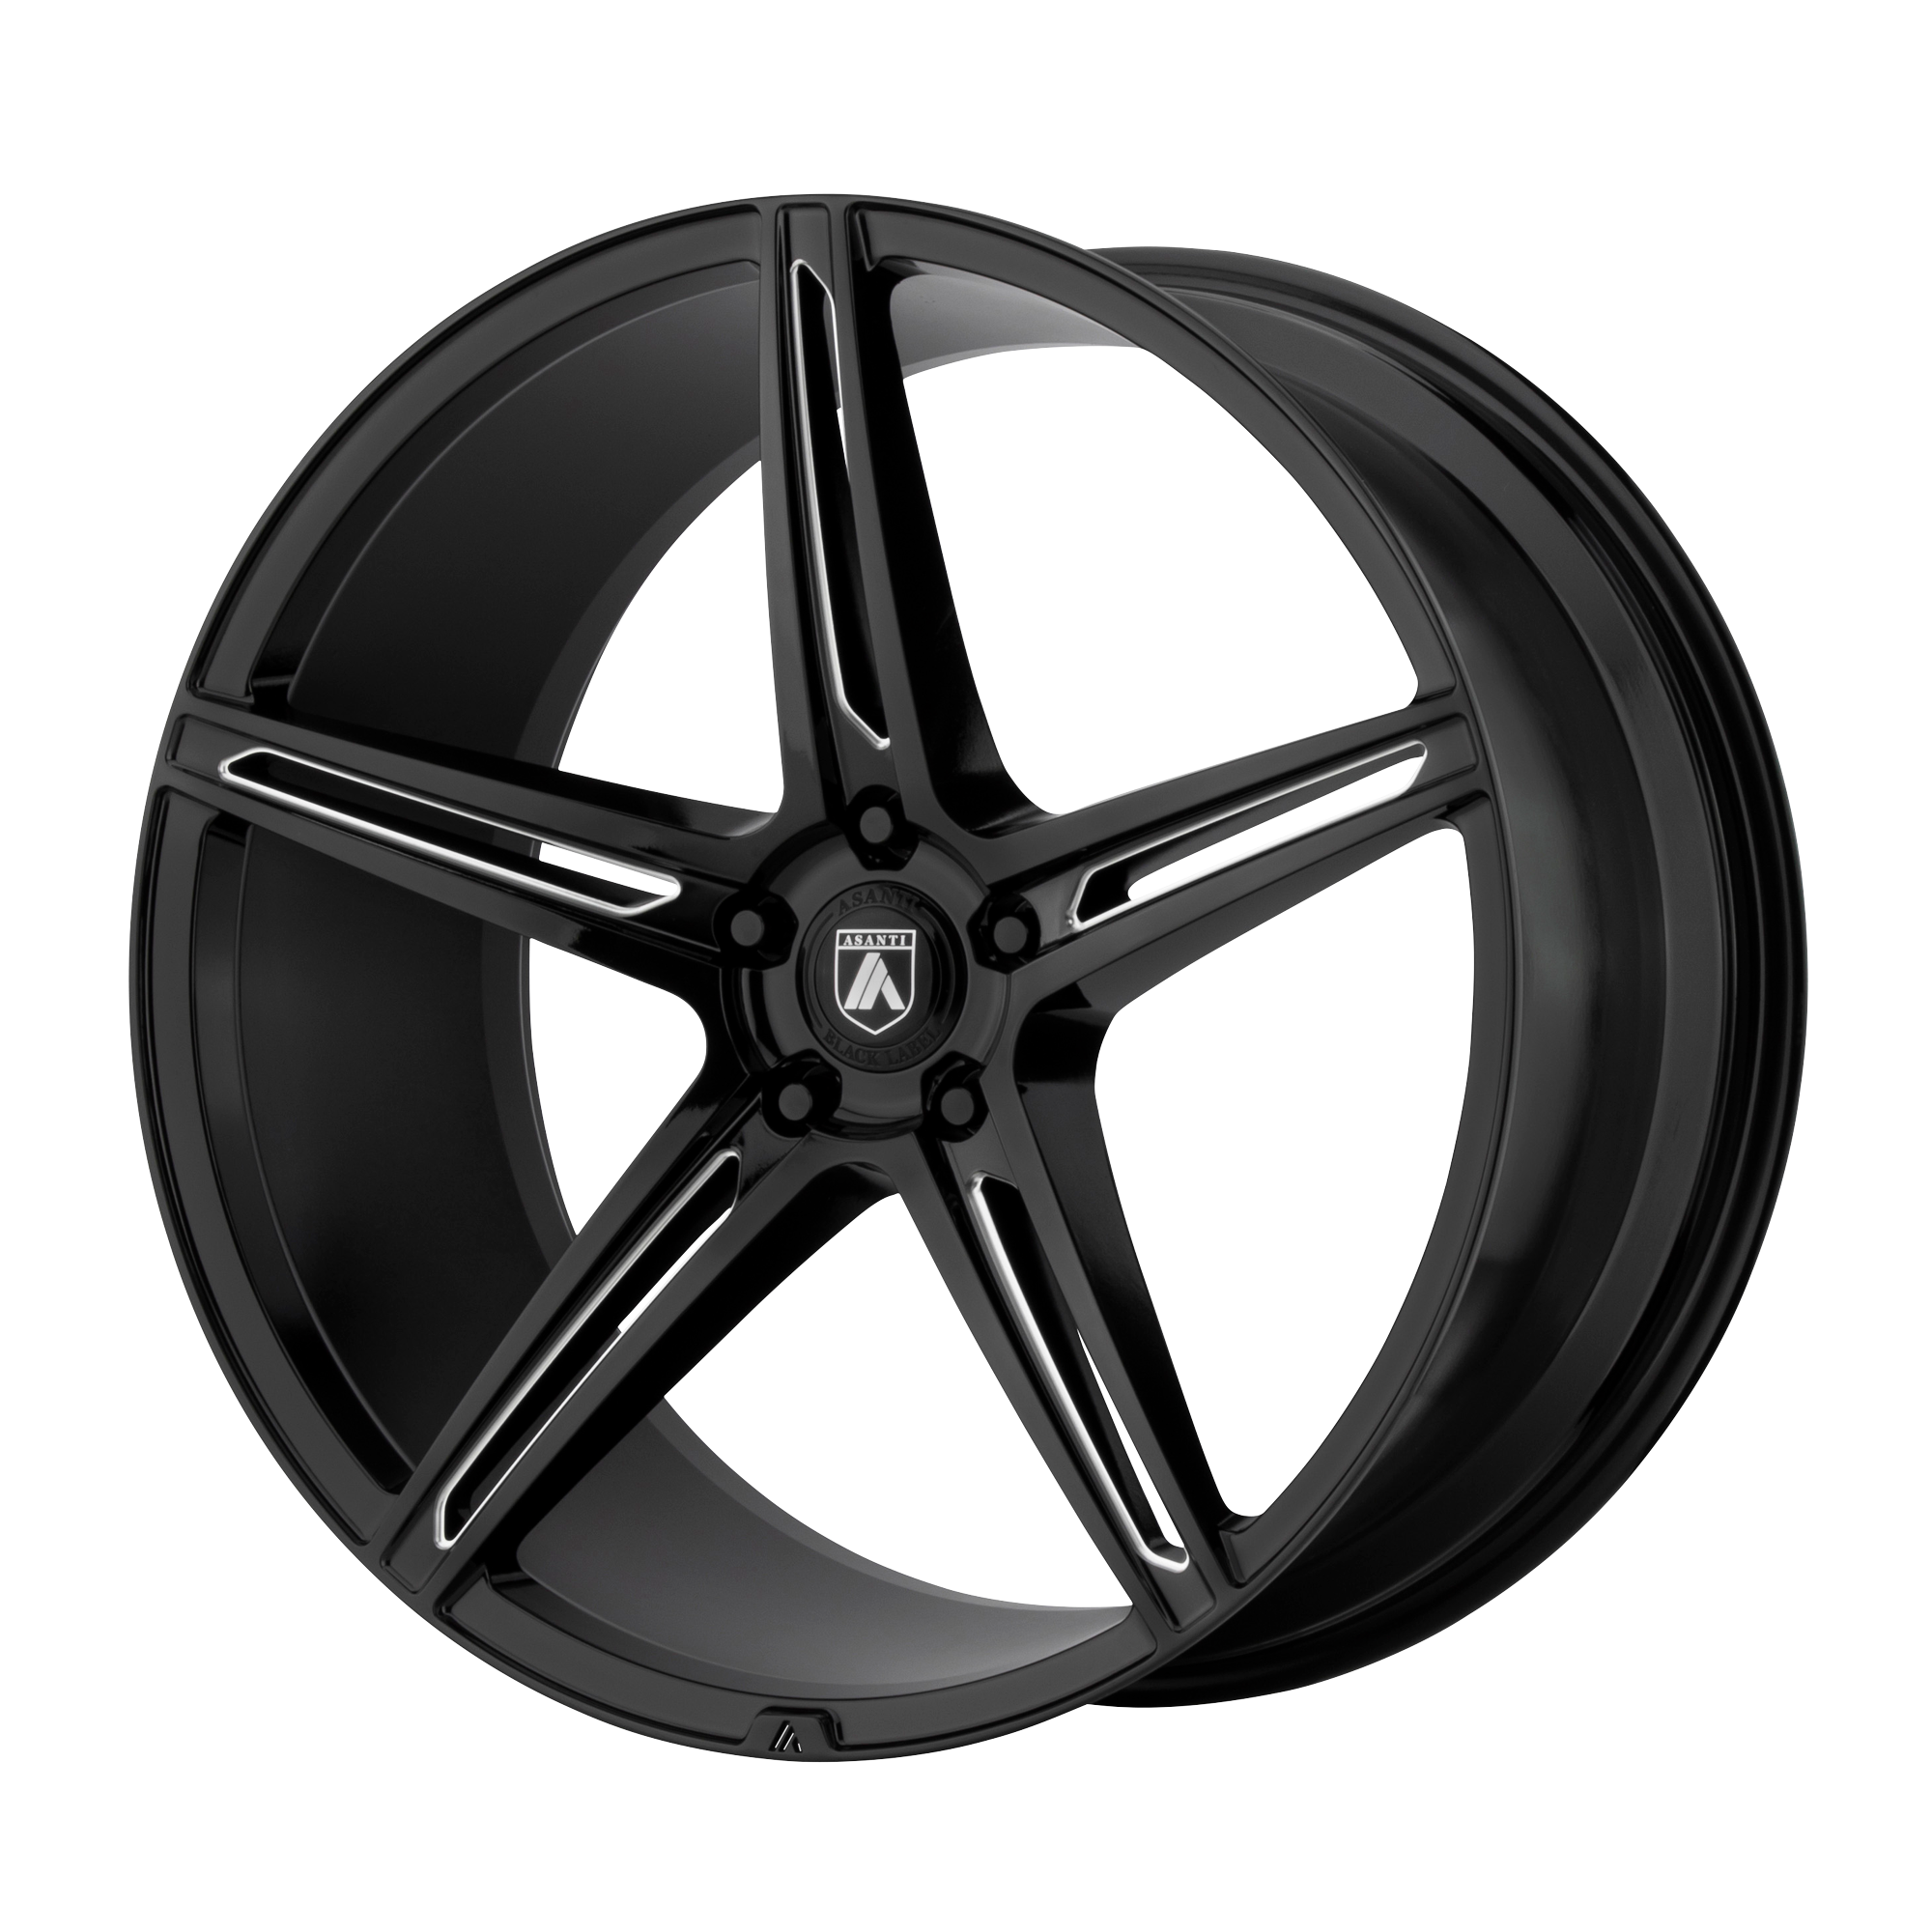 ALPHA 5 22x10.5 5x112.00 GLOSS BLACK MILLED (35 mm) - Tires and Engine Performance